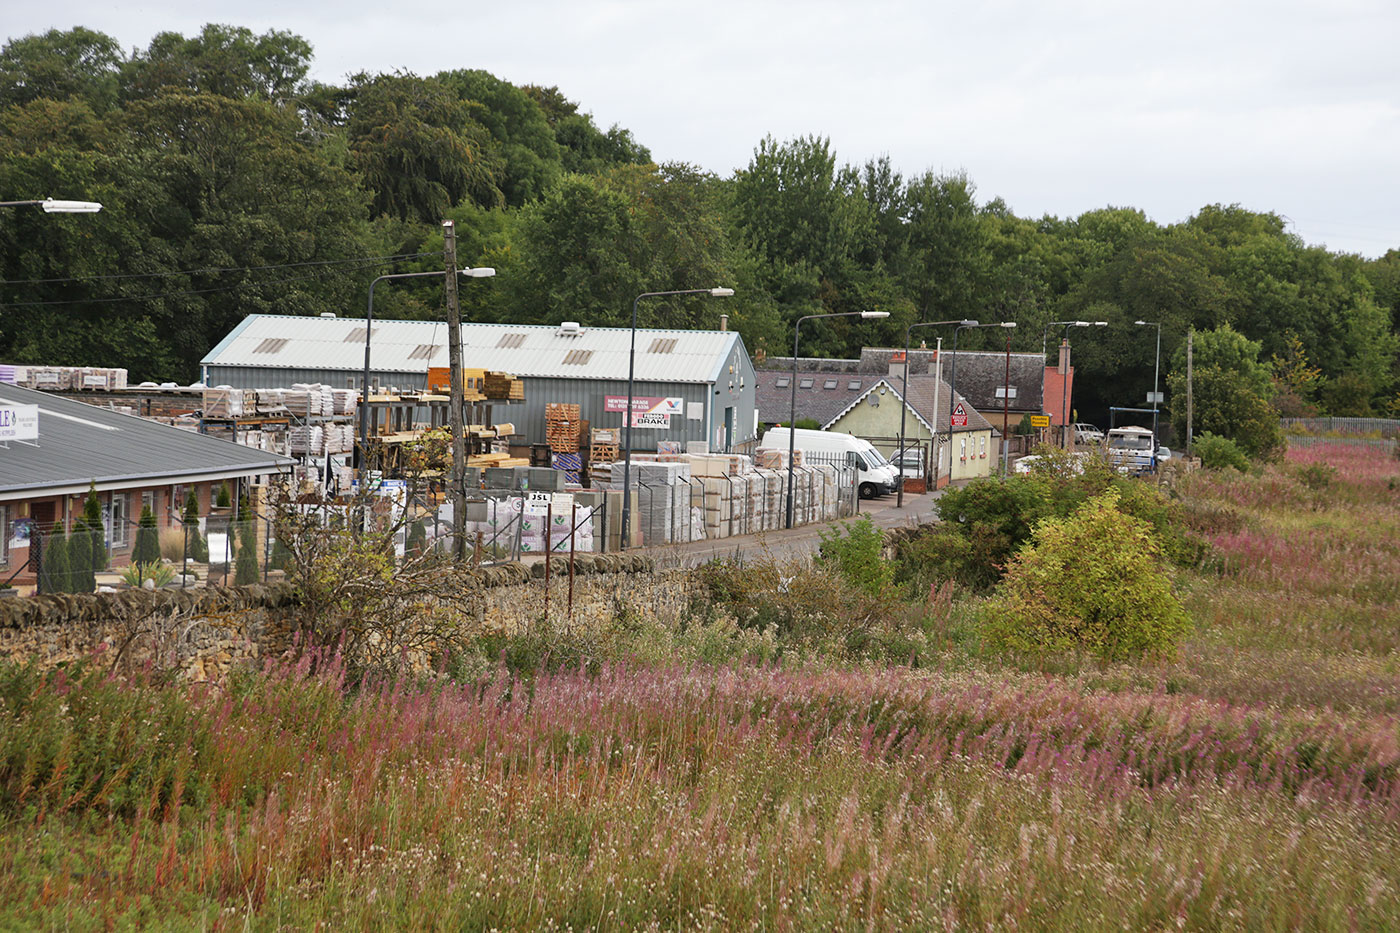 The site of Bankfield Cottages at The Wisp, Edinburgh  -  Photo taken August 2014